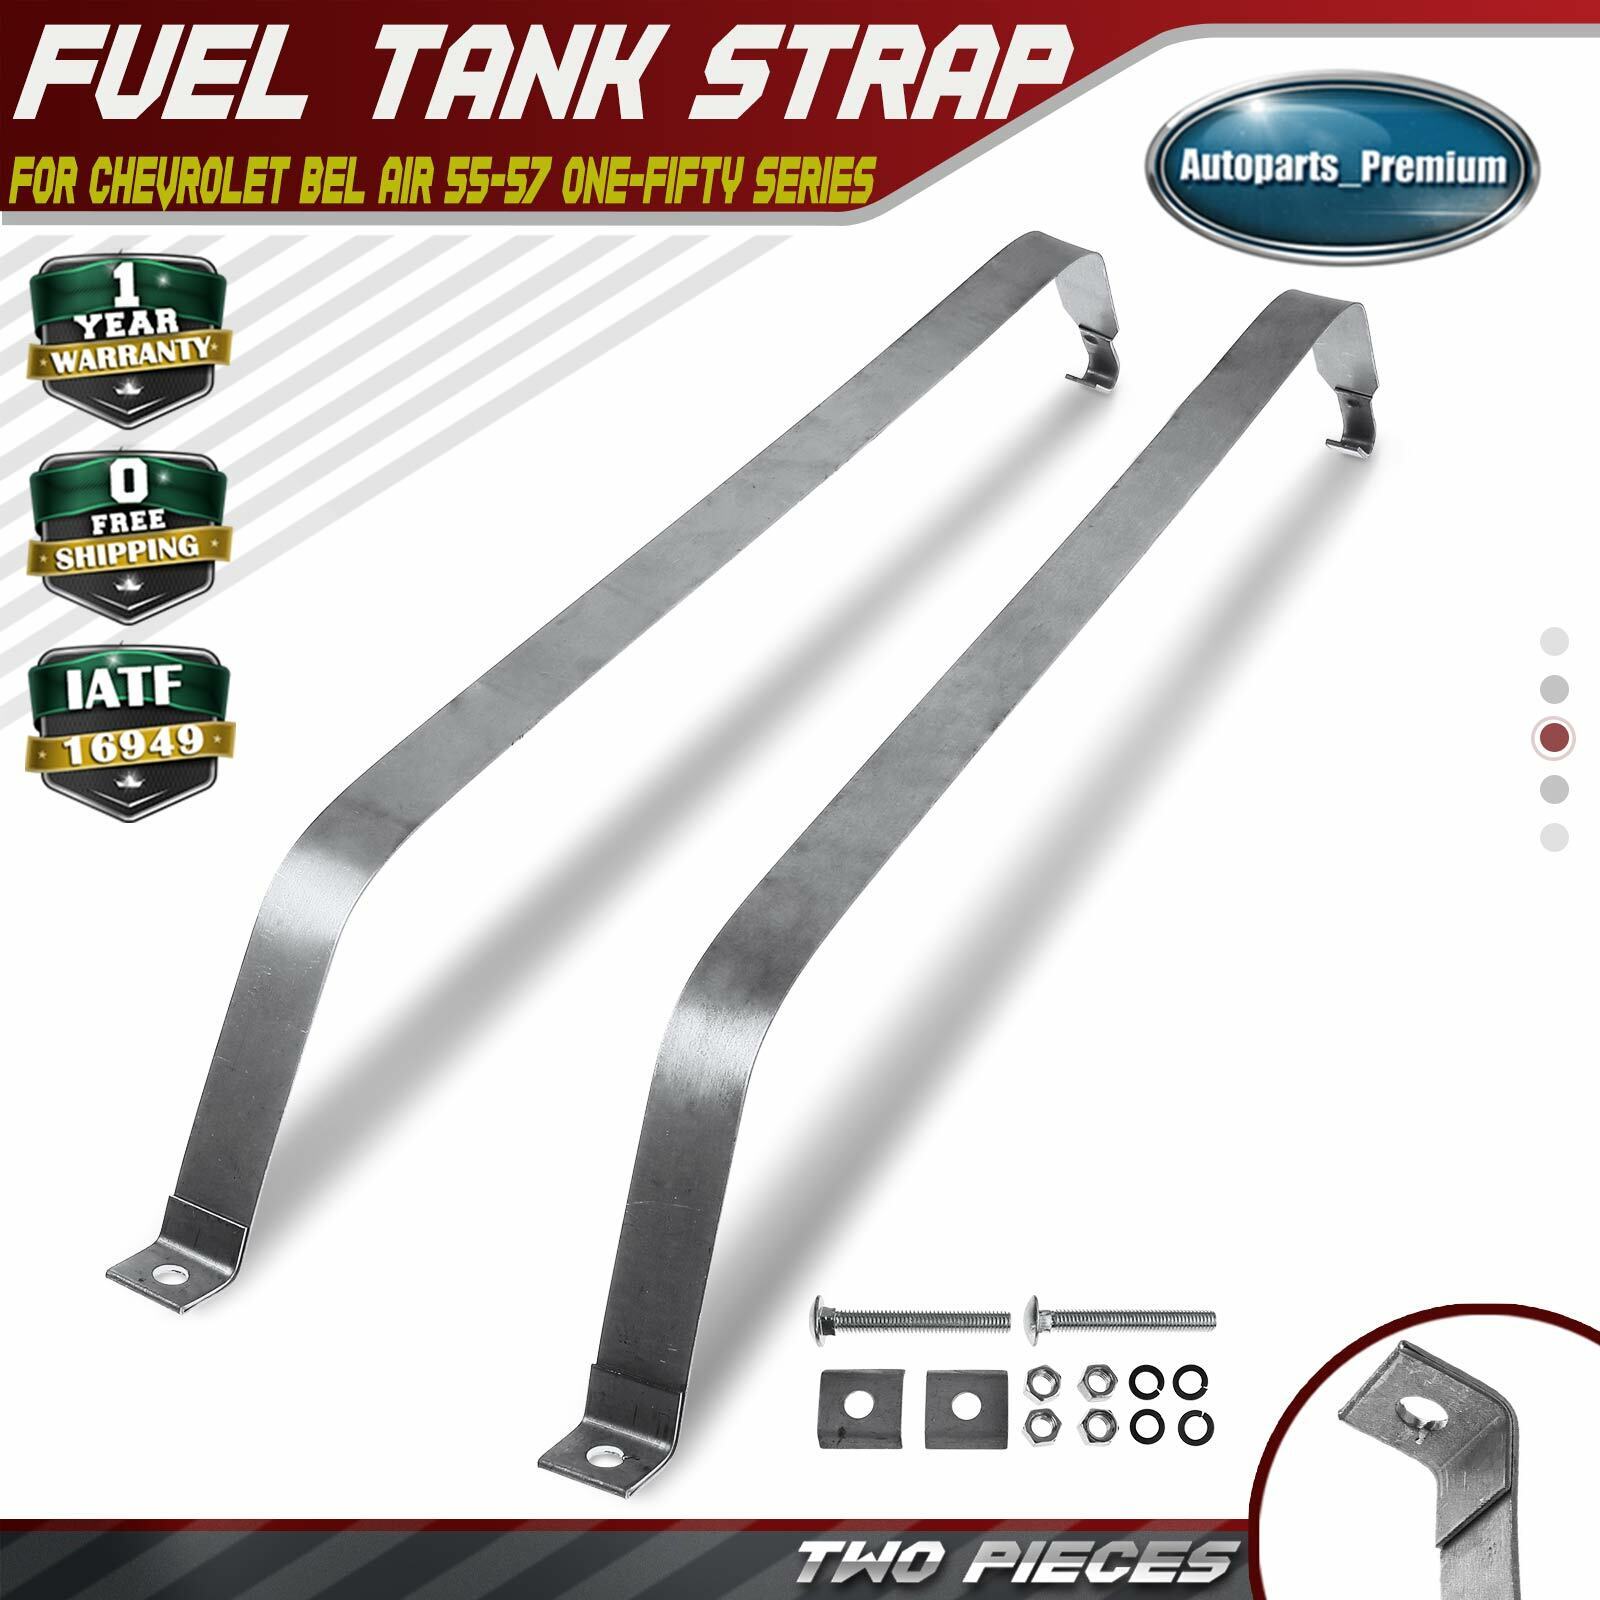 2x Fuel Tank Strap for Chevrolet Bel Air One-Fifty Series Two-Ten Series 1955-57